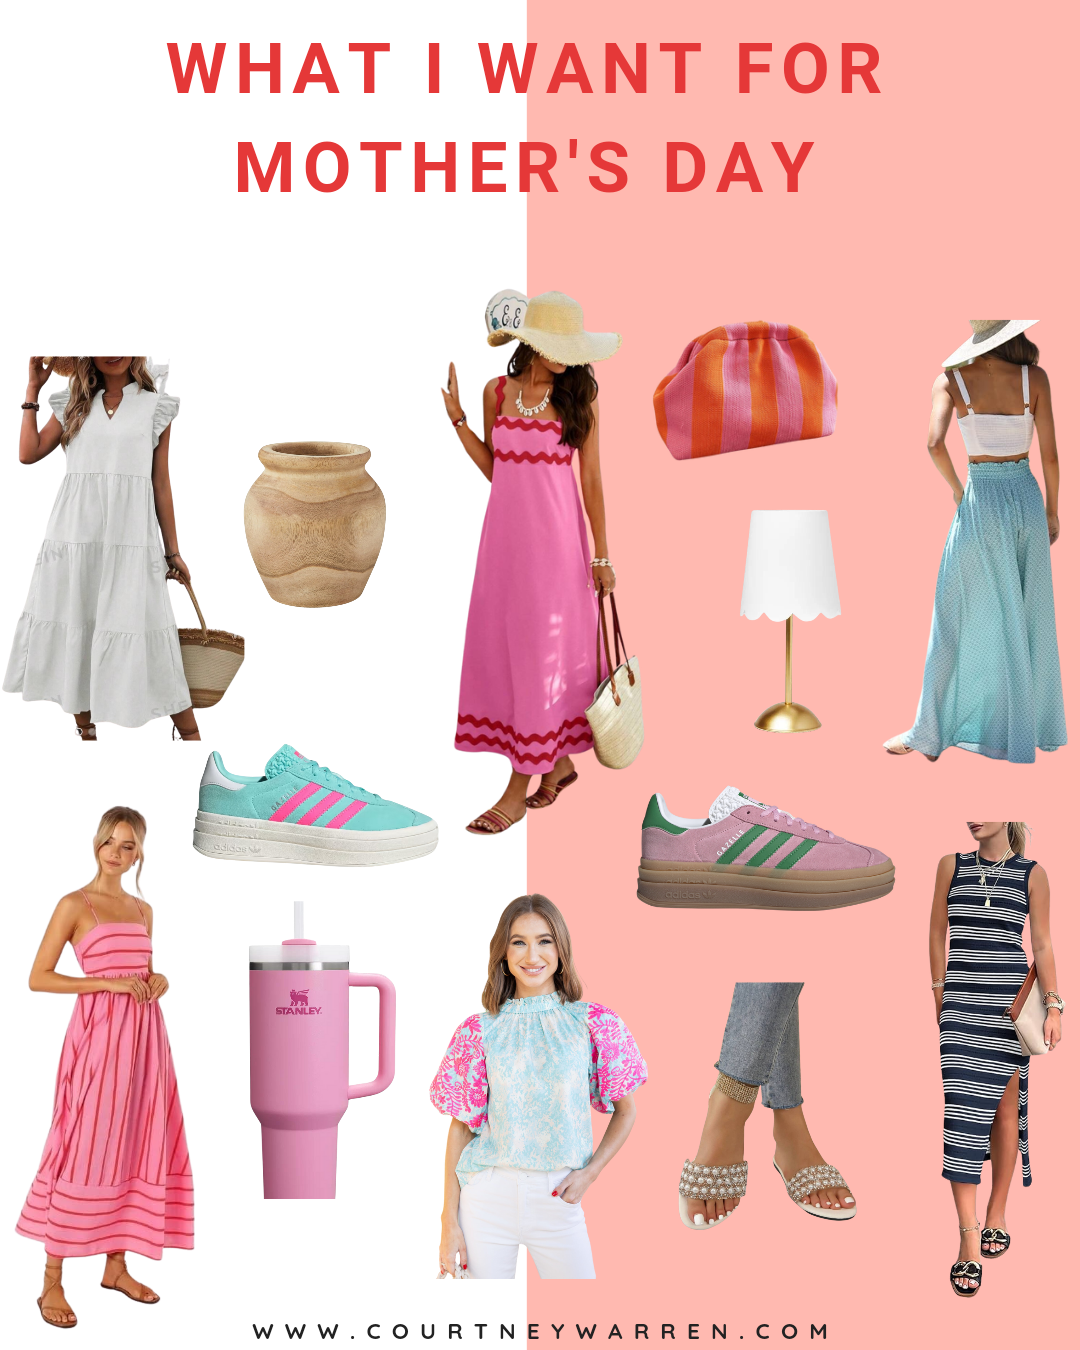 13 Cute Mother’s Day Gift Ideas for the Stylish Mom